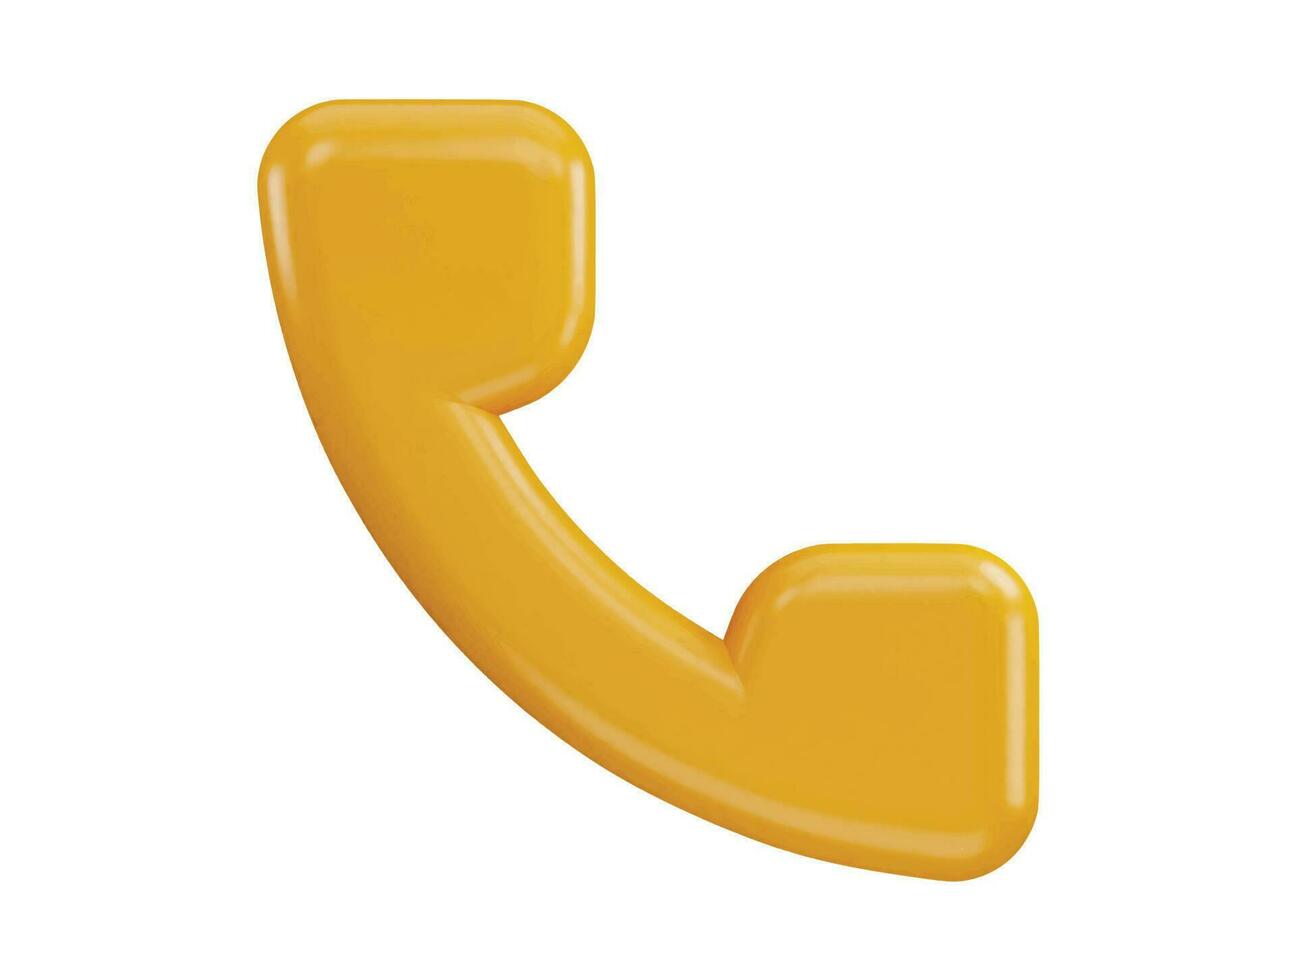 Phone with 3d rendering vector icon illustration